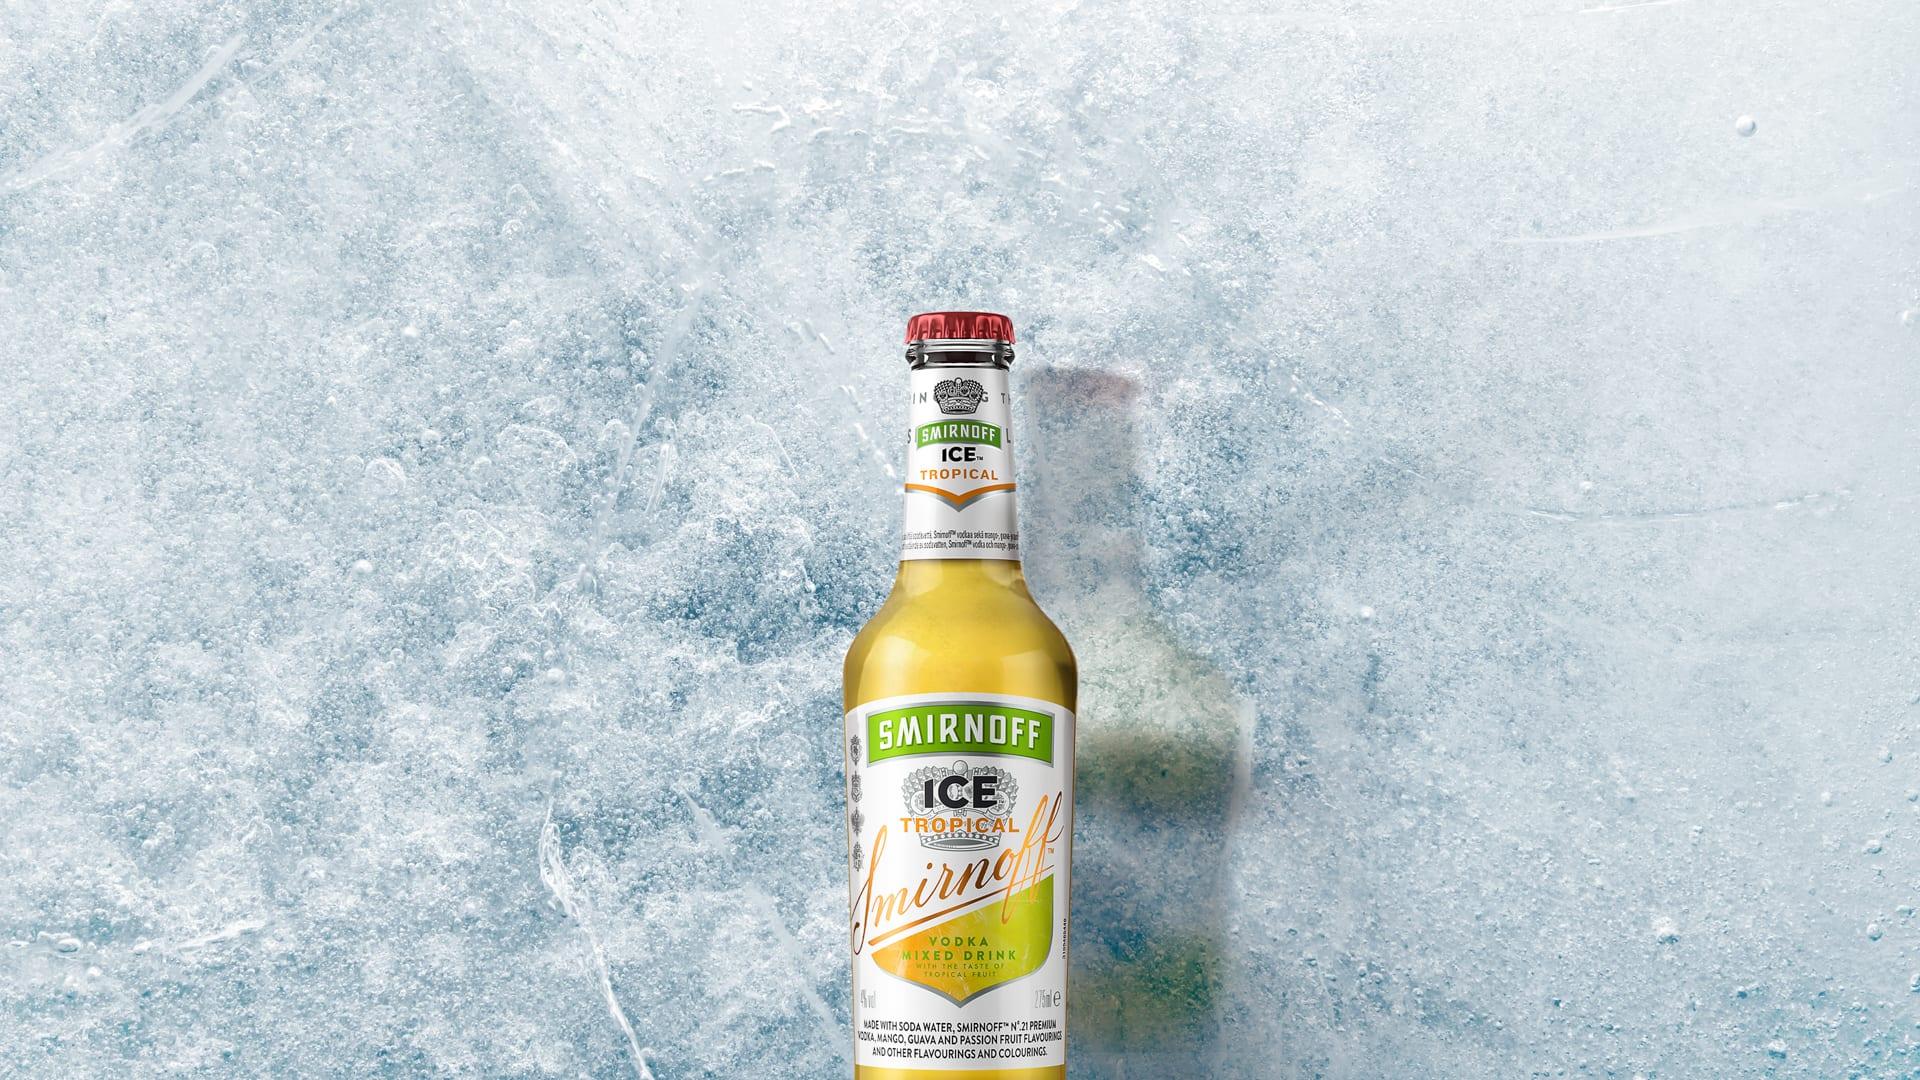 Smirnoff Ice Tropical on a Icy background